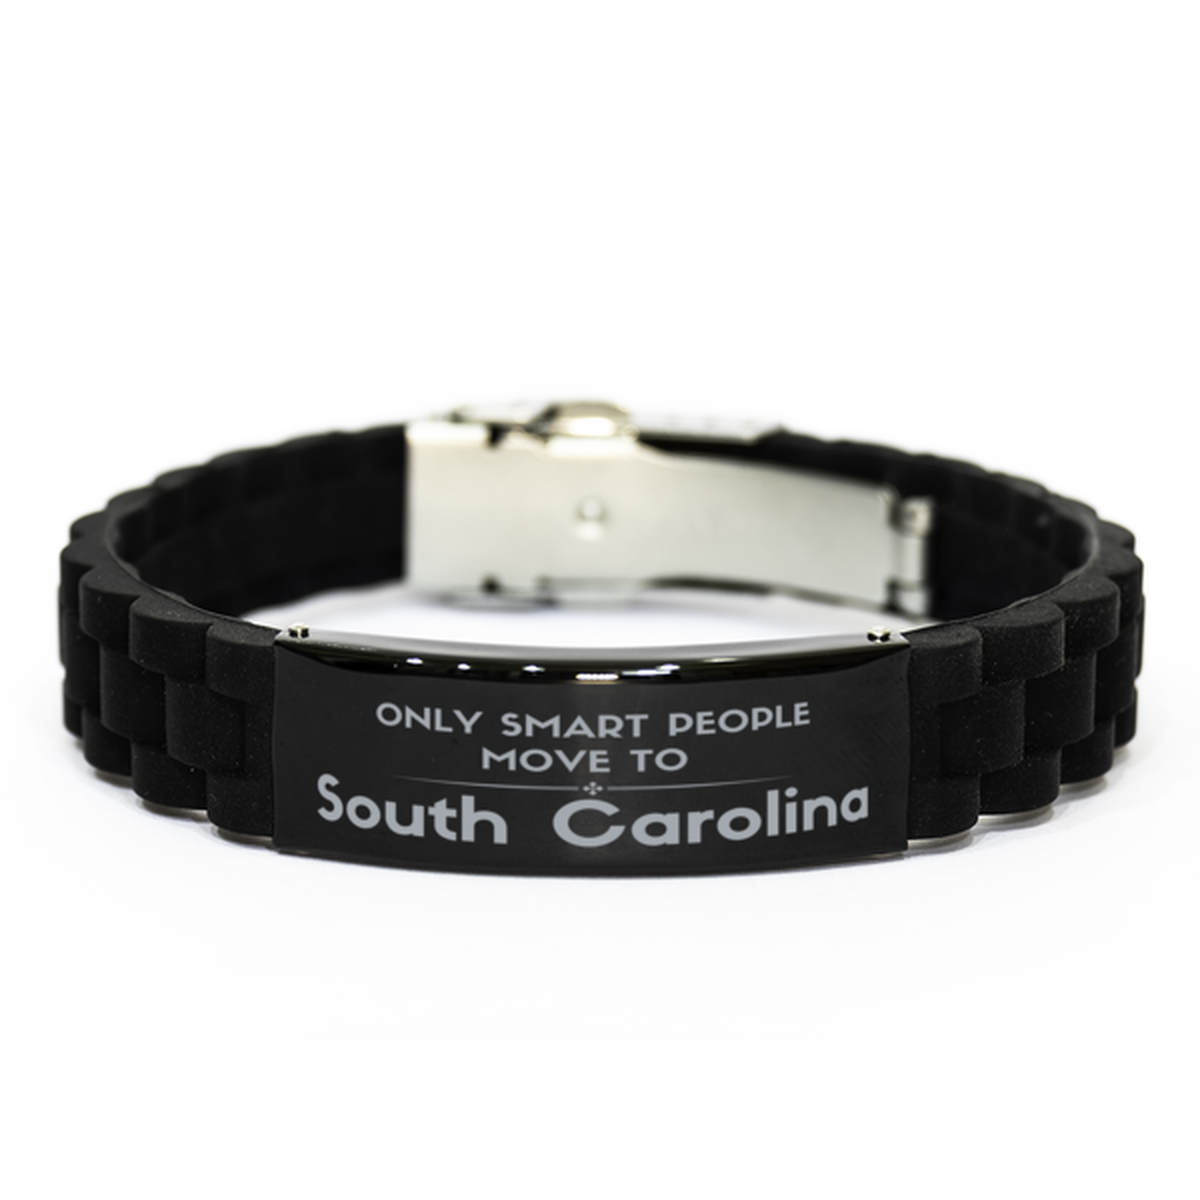 Only smart people move to South Carolina Black Glidelock Clasp Bracelet, Gag Gifts For South Carolina, Move to South Carolina Gifts for Friends Coworker Funny Saying Quote